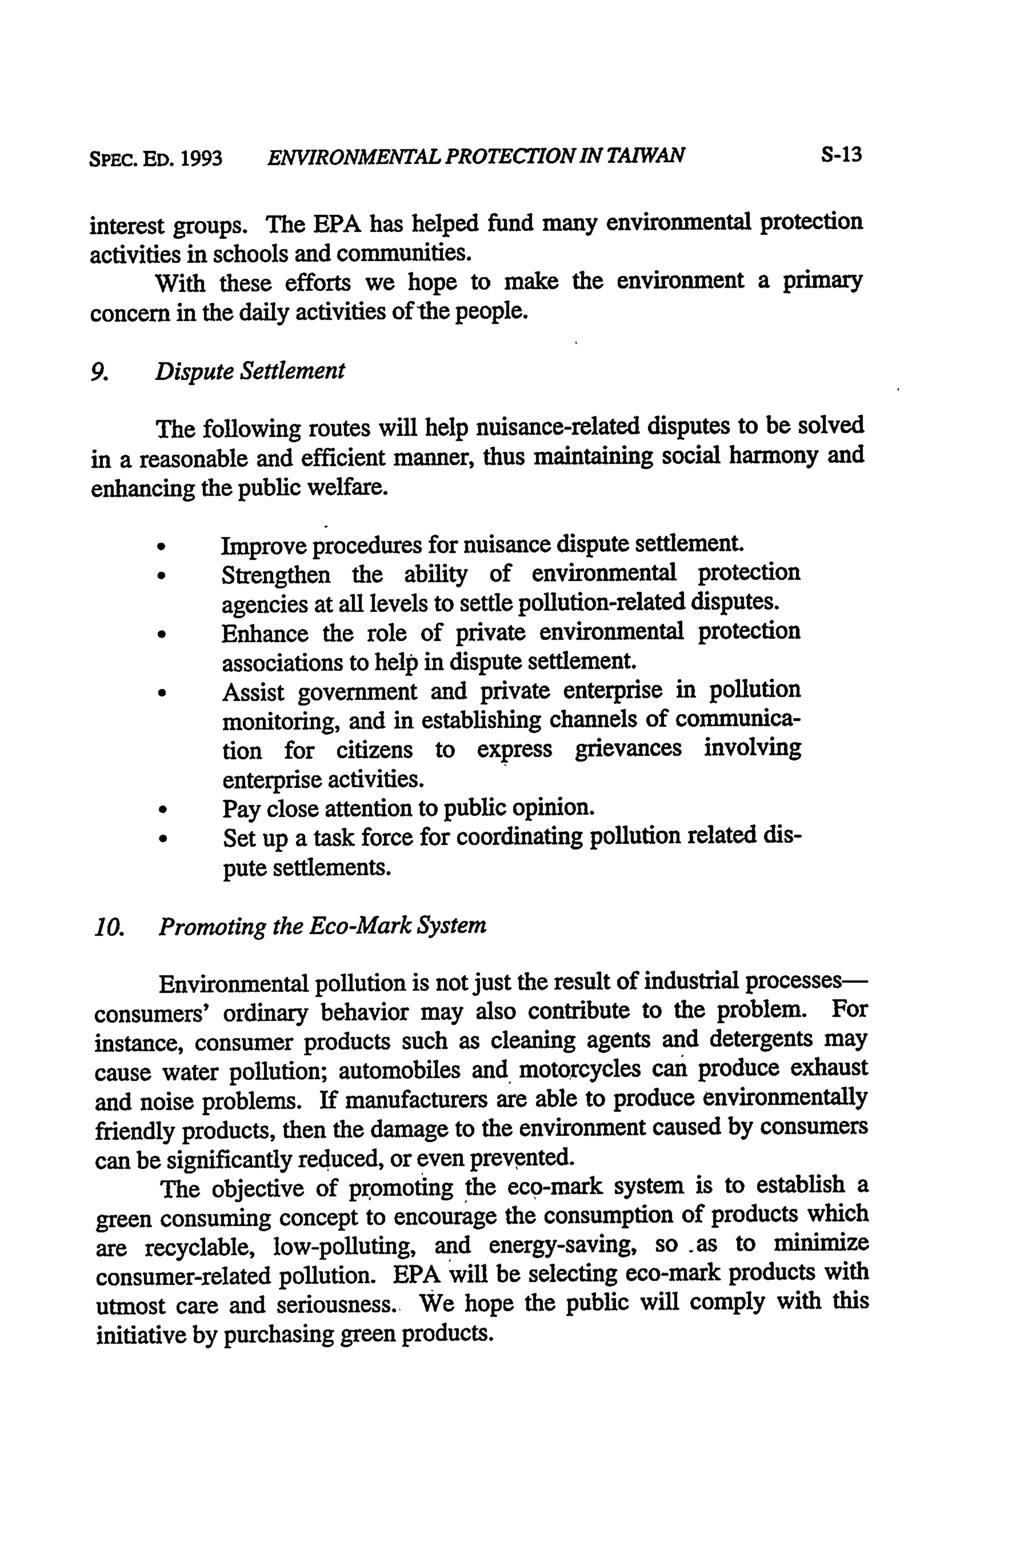 SPEC. ED. 1993 ENVIRONMENTAL PROTECTION IN TAIWAN S-13 interest groups. The EPA has helped fund many environmental protection activities in schools and communities.